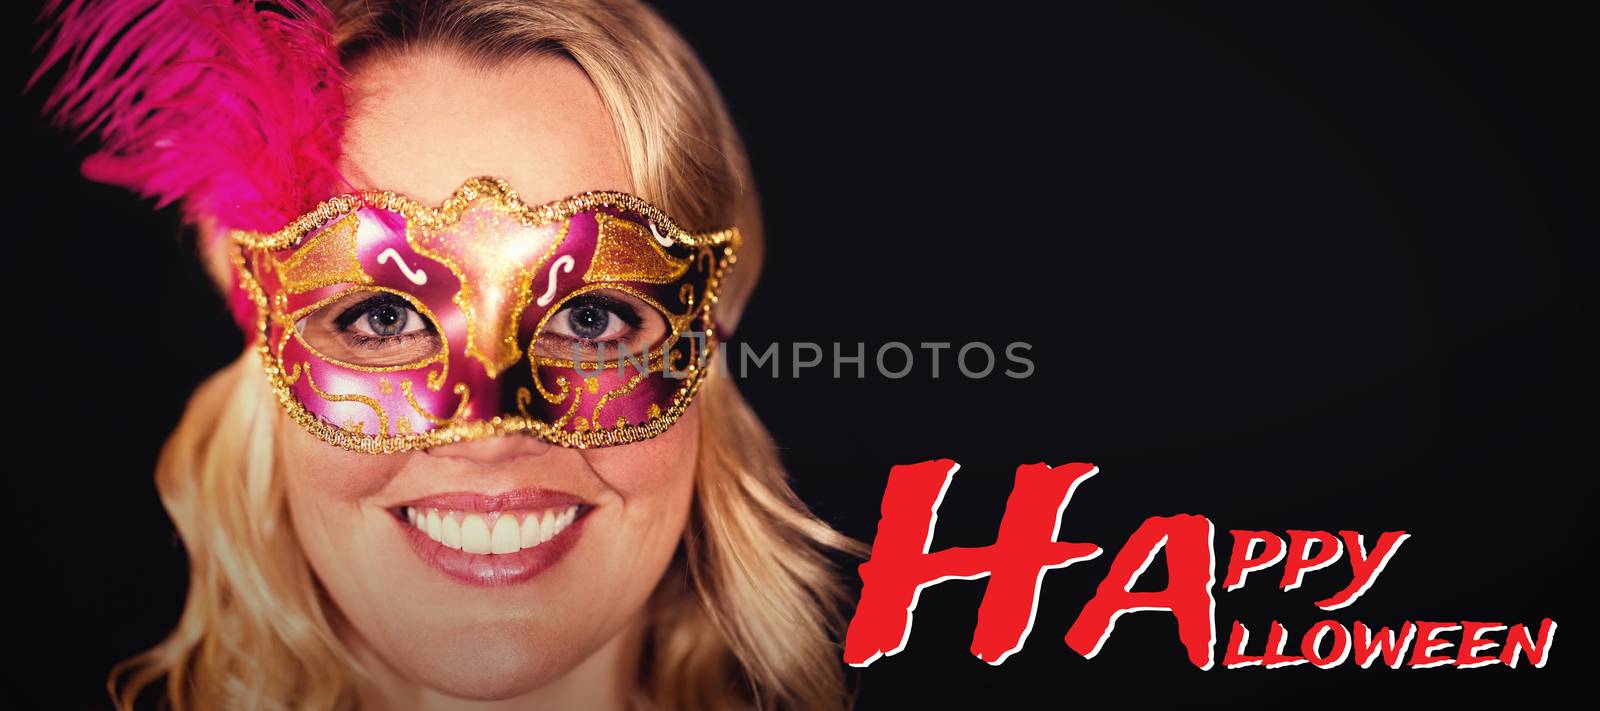 Graphic image of Happy Halloween text against portrait of happy woman in masquerade mask 